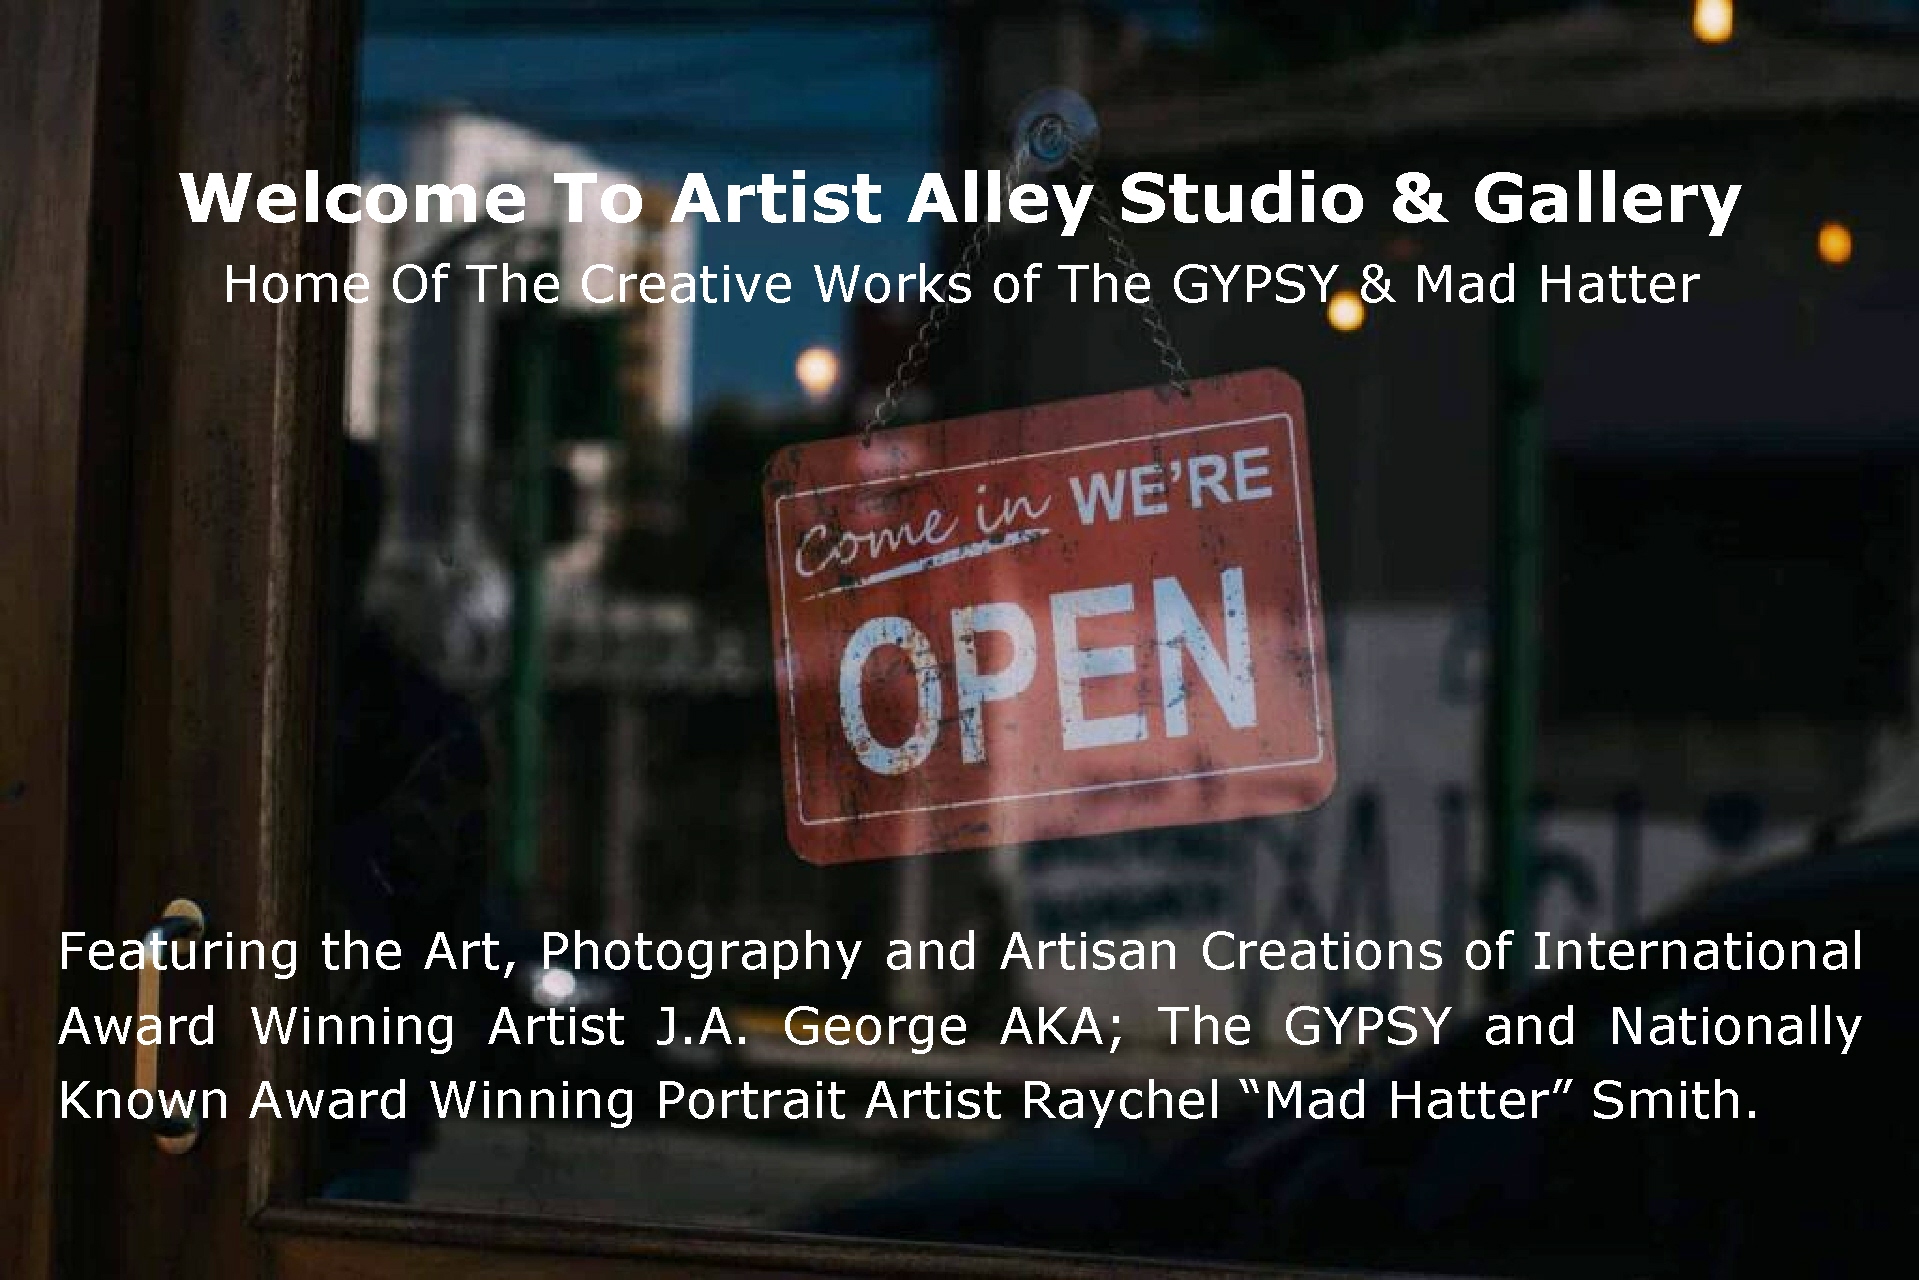 Open Sign For Entrance To Artist Alley Studio and Gallery